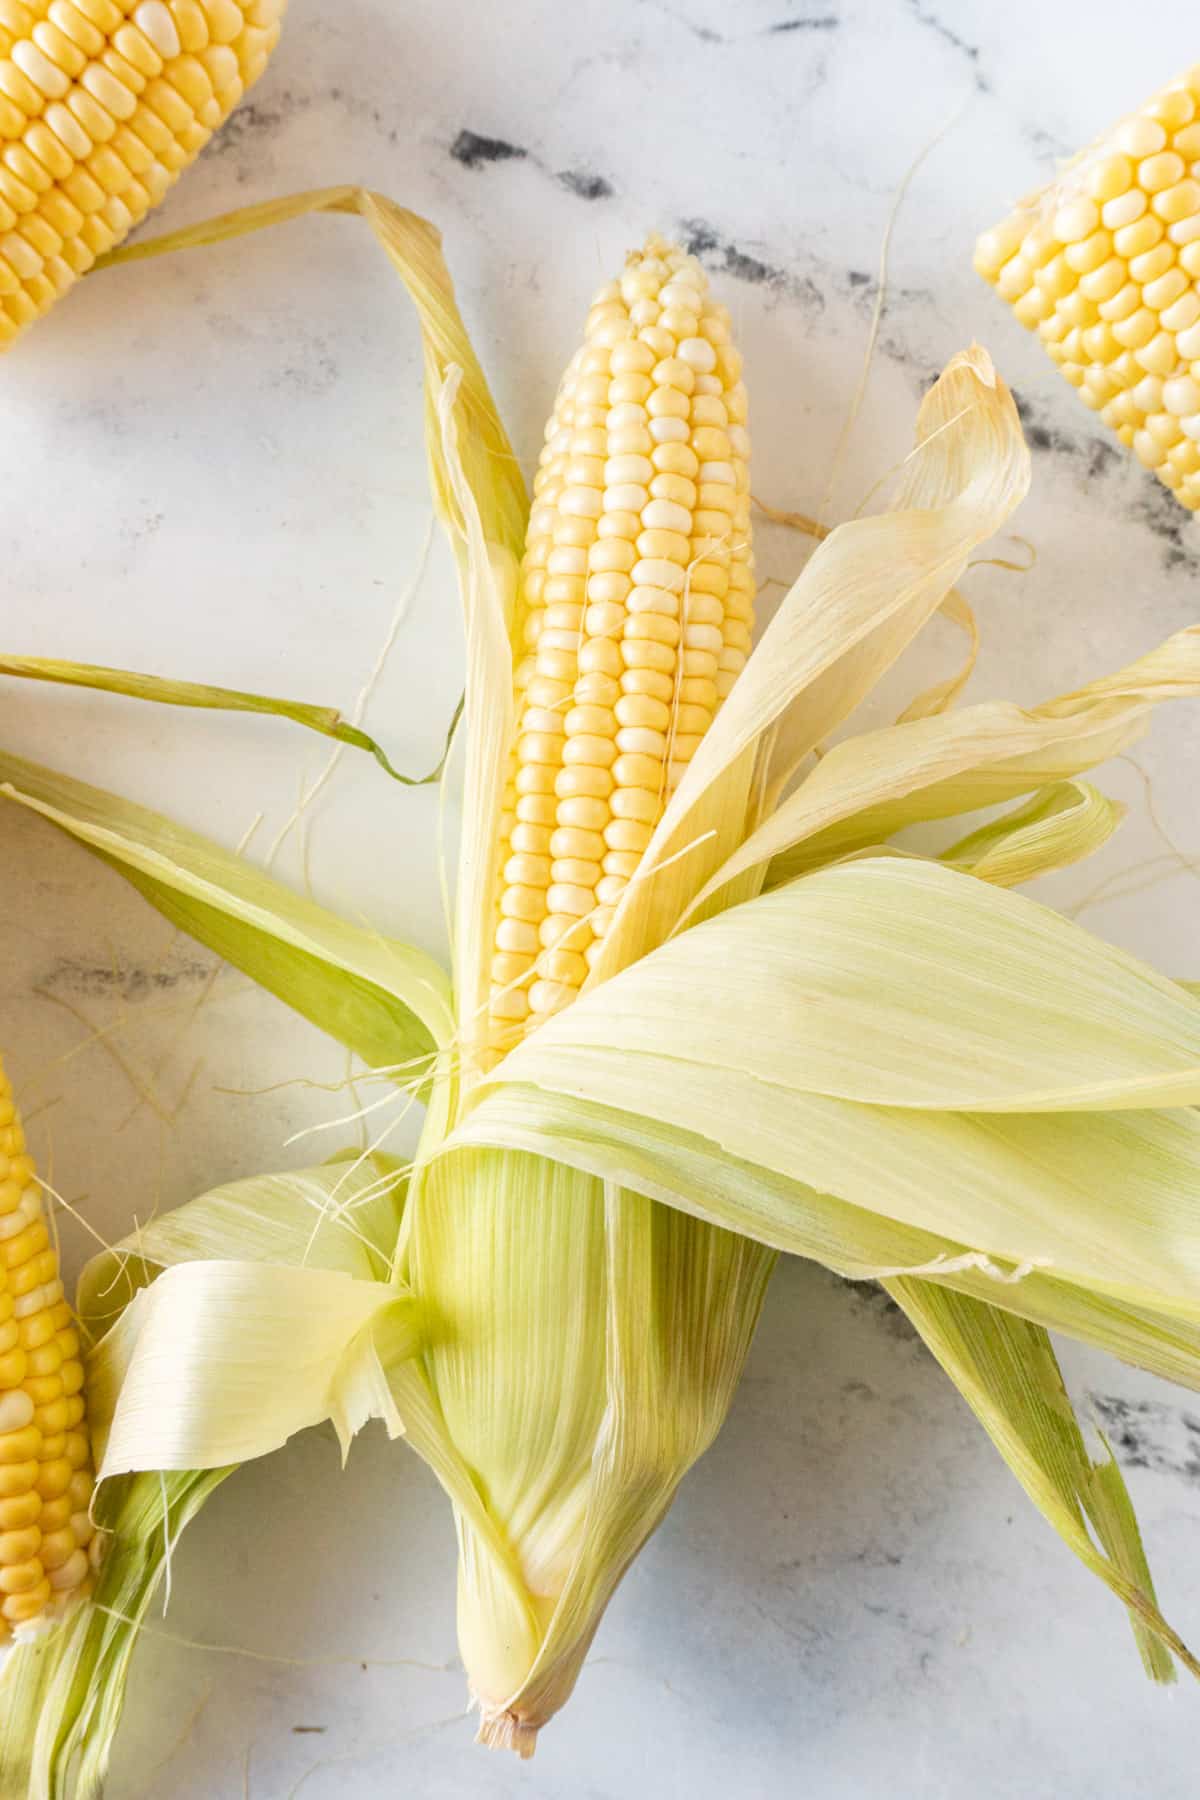 corn with husk still attached